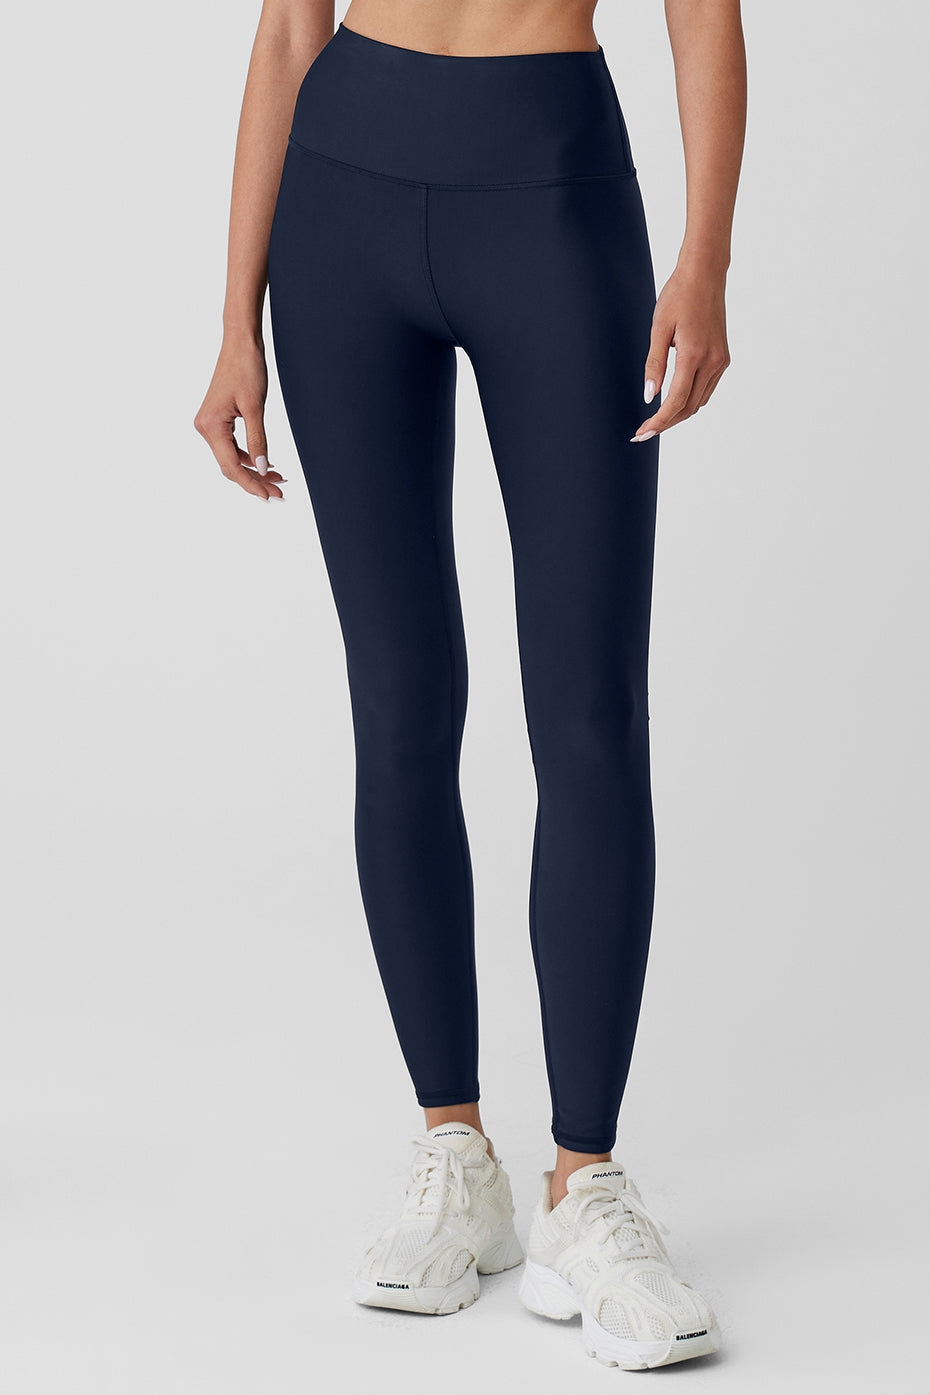 ALO Yoga 7/8 High-Waist Airlift Legging in Infinity Blue Size Small Retail  $128